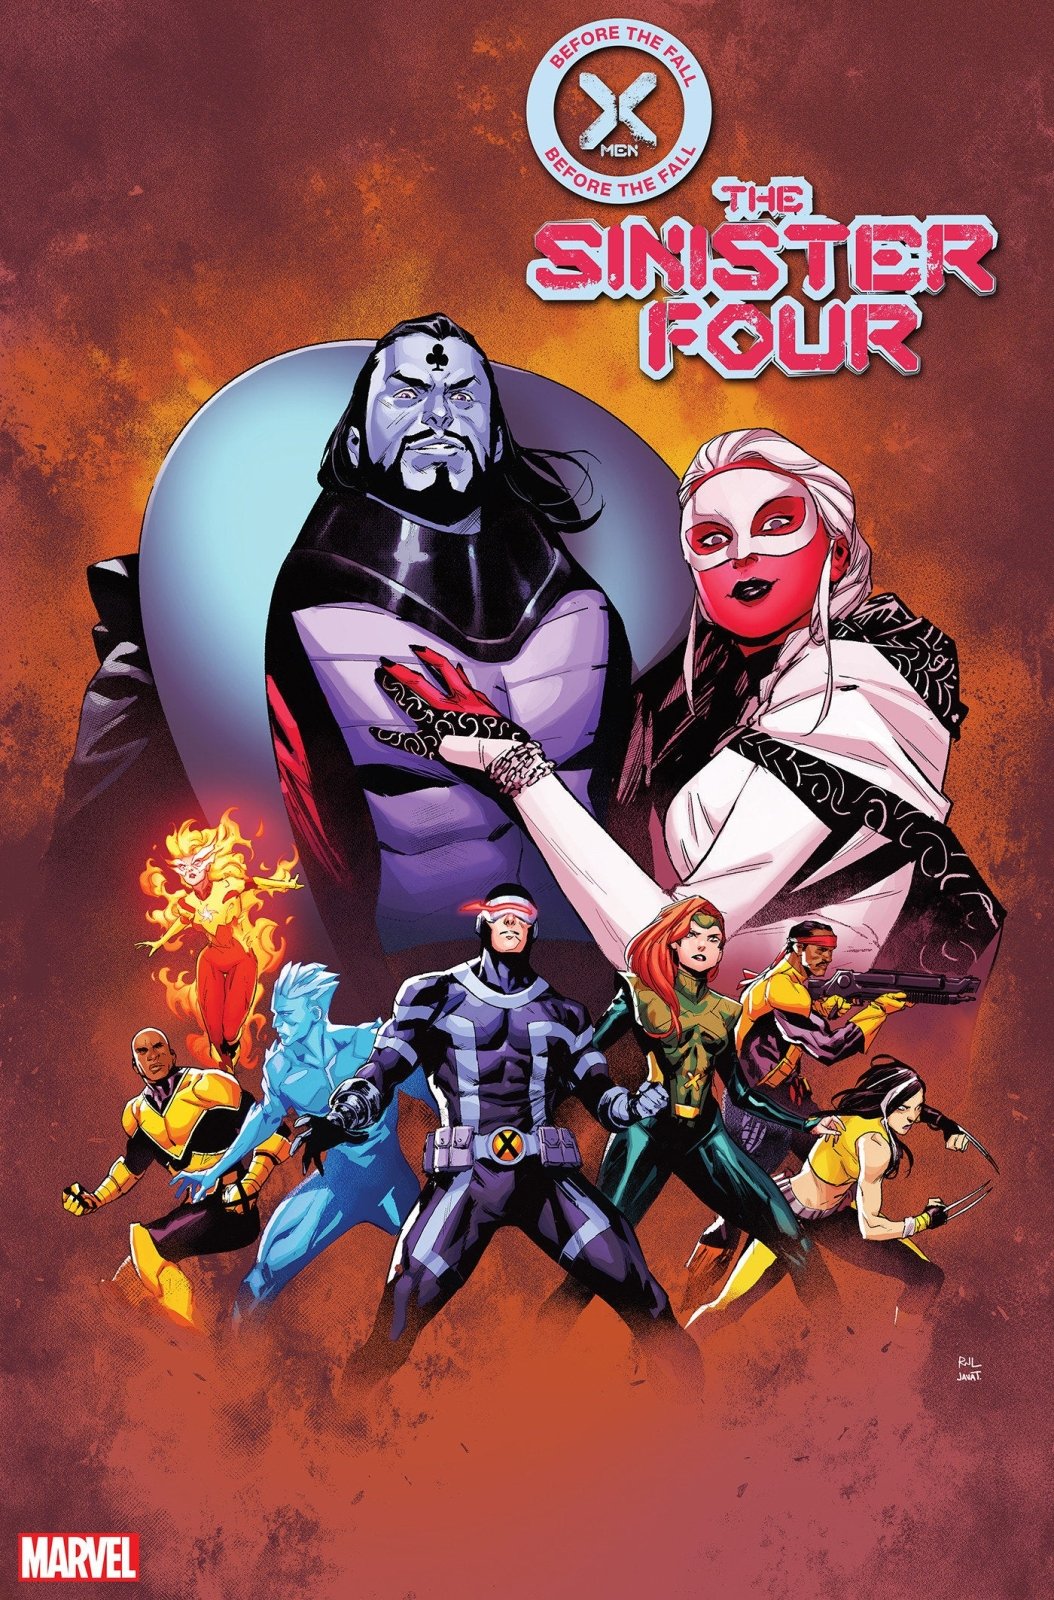 X-Men: Before The Fall - Sinister Four 1 Rafael De La Torre Variant - The Fourth Place